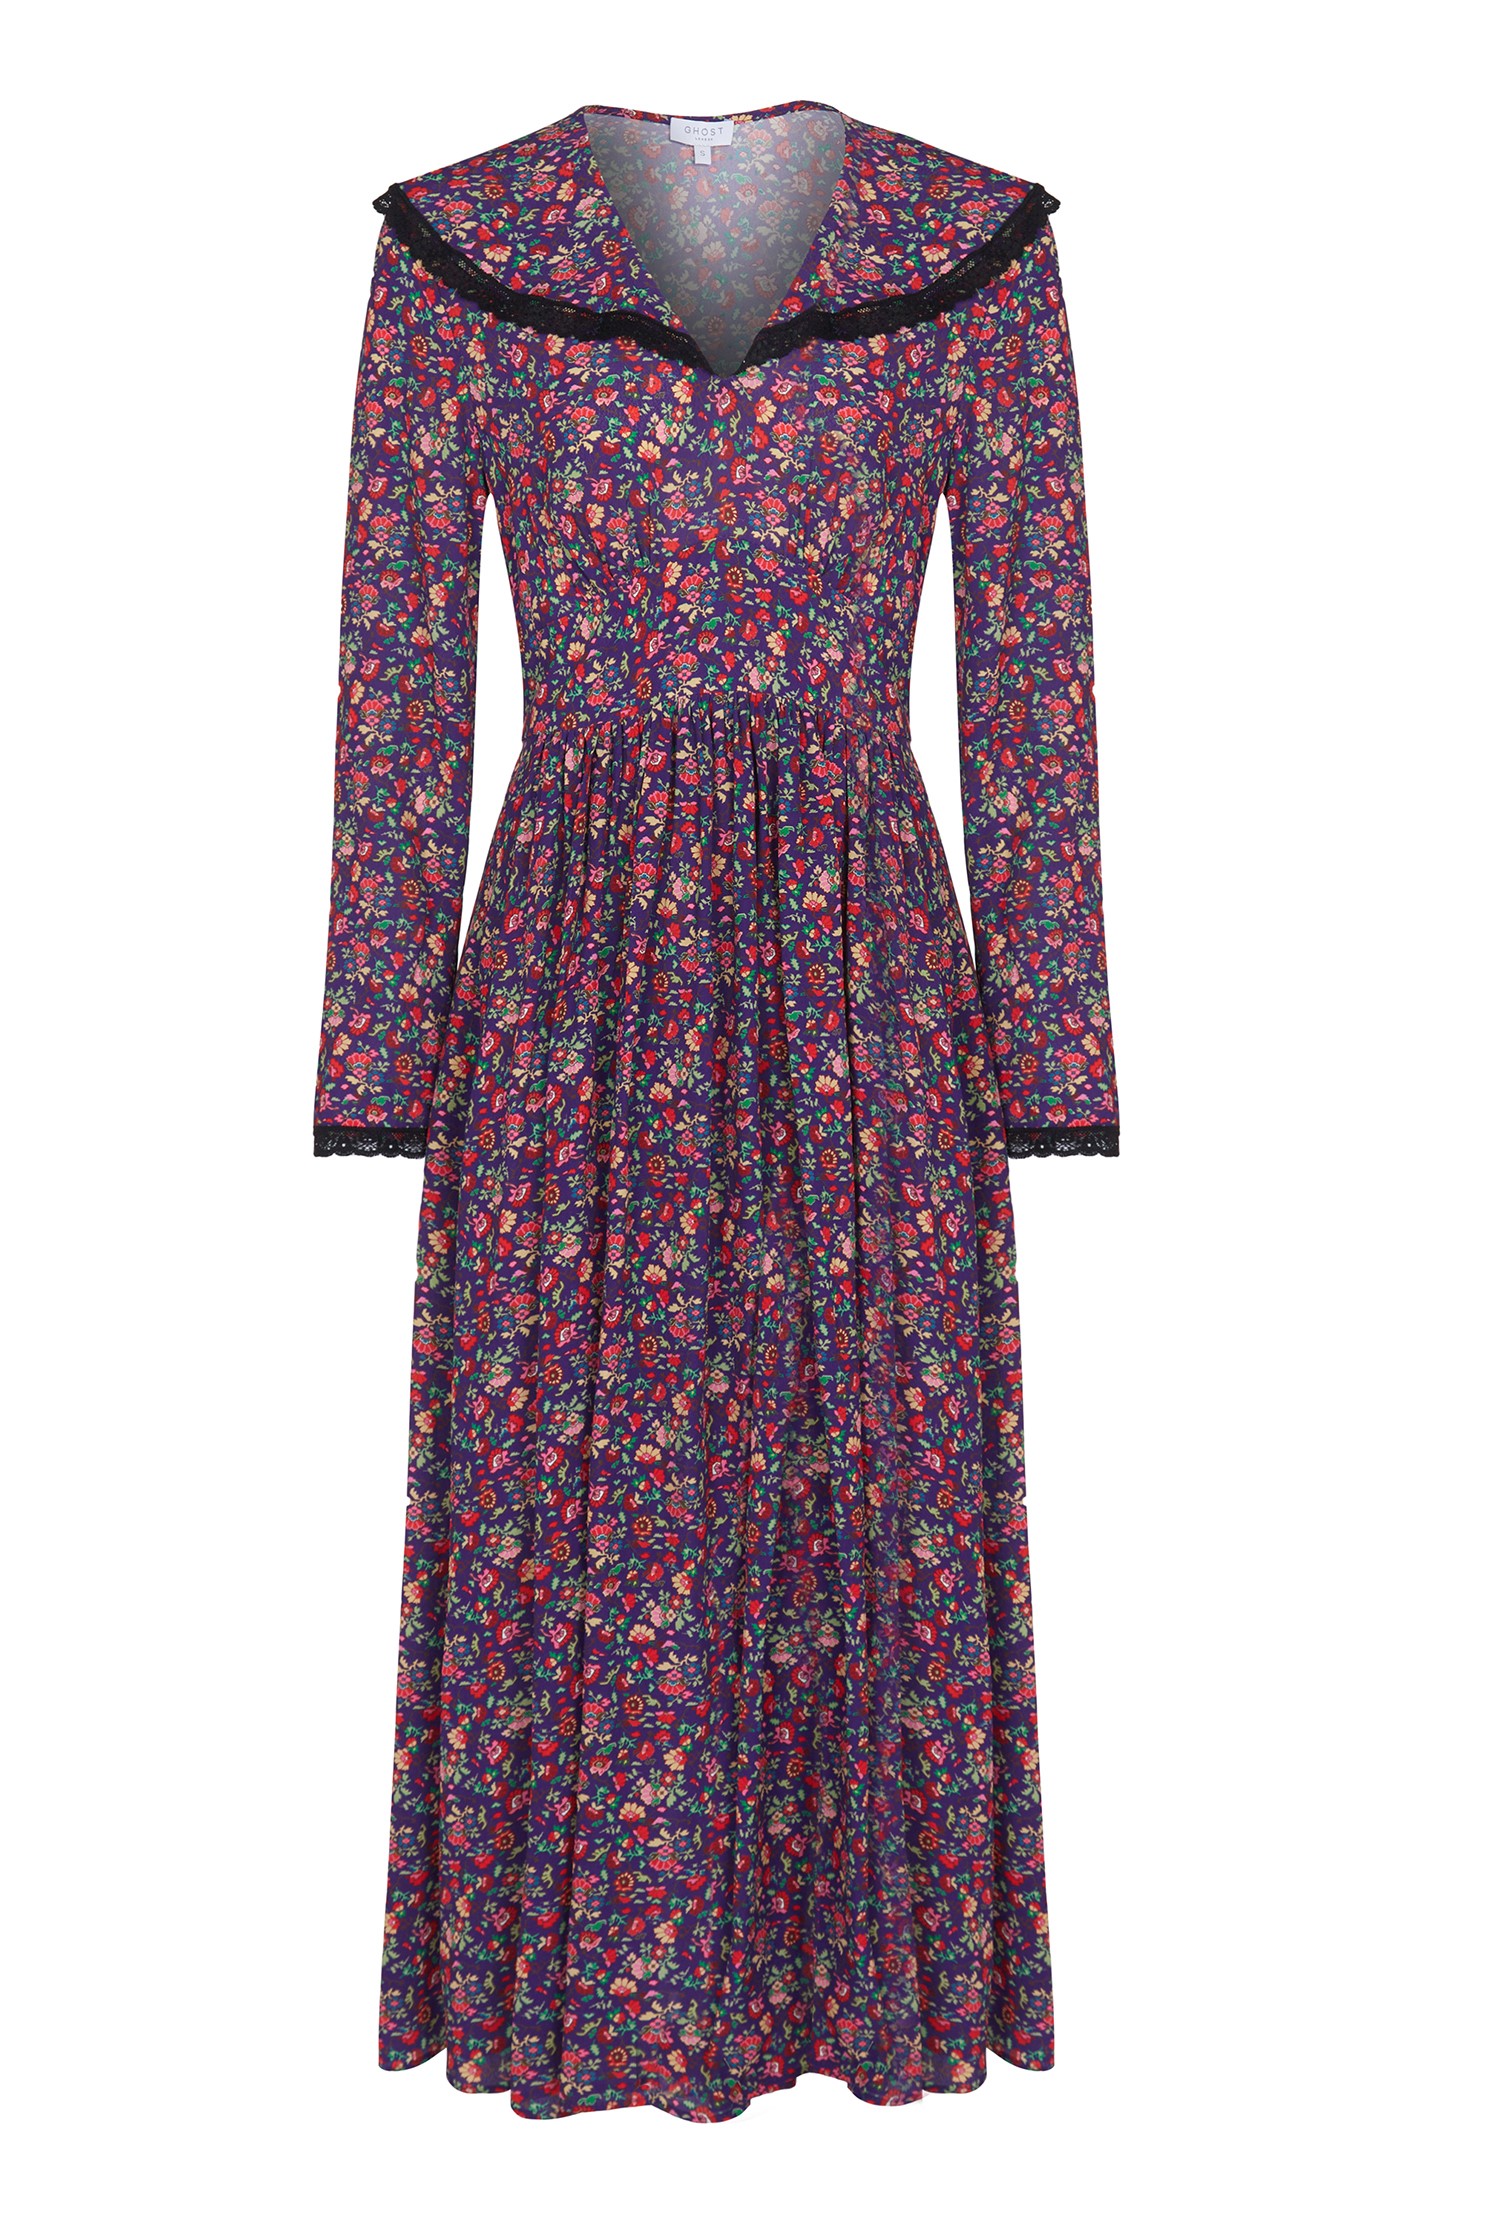 Maxi Ggt Crepe Dress With Long Sleeves In Purple And Red With Statement ...